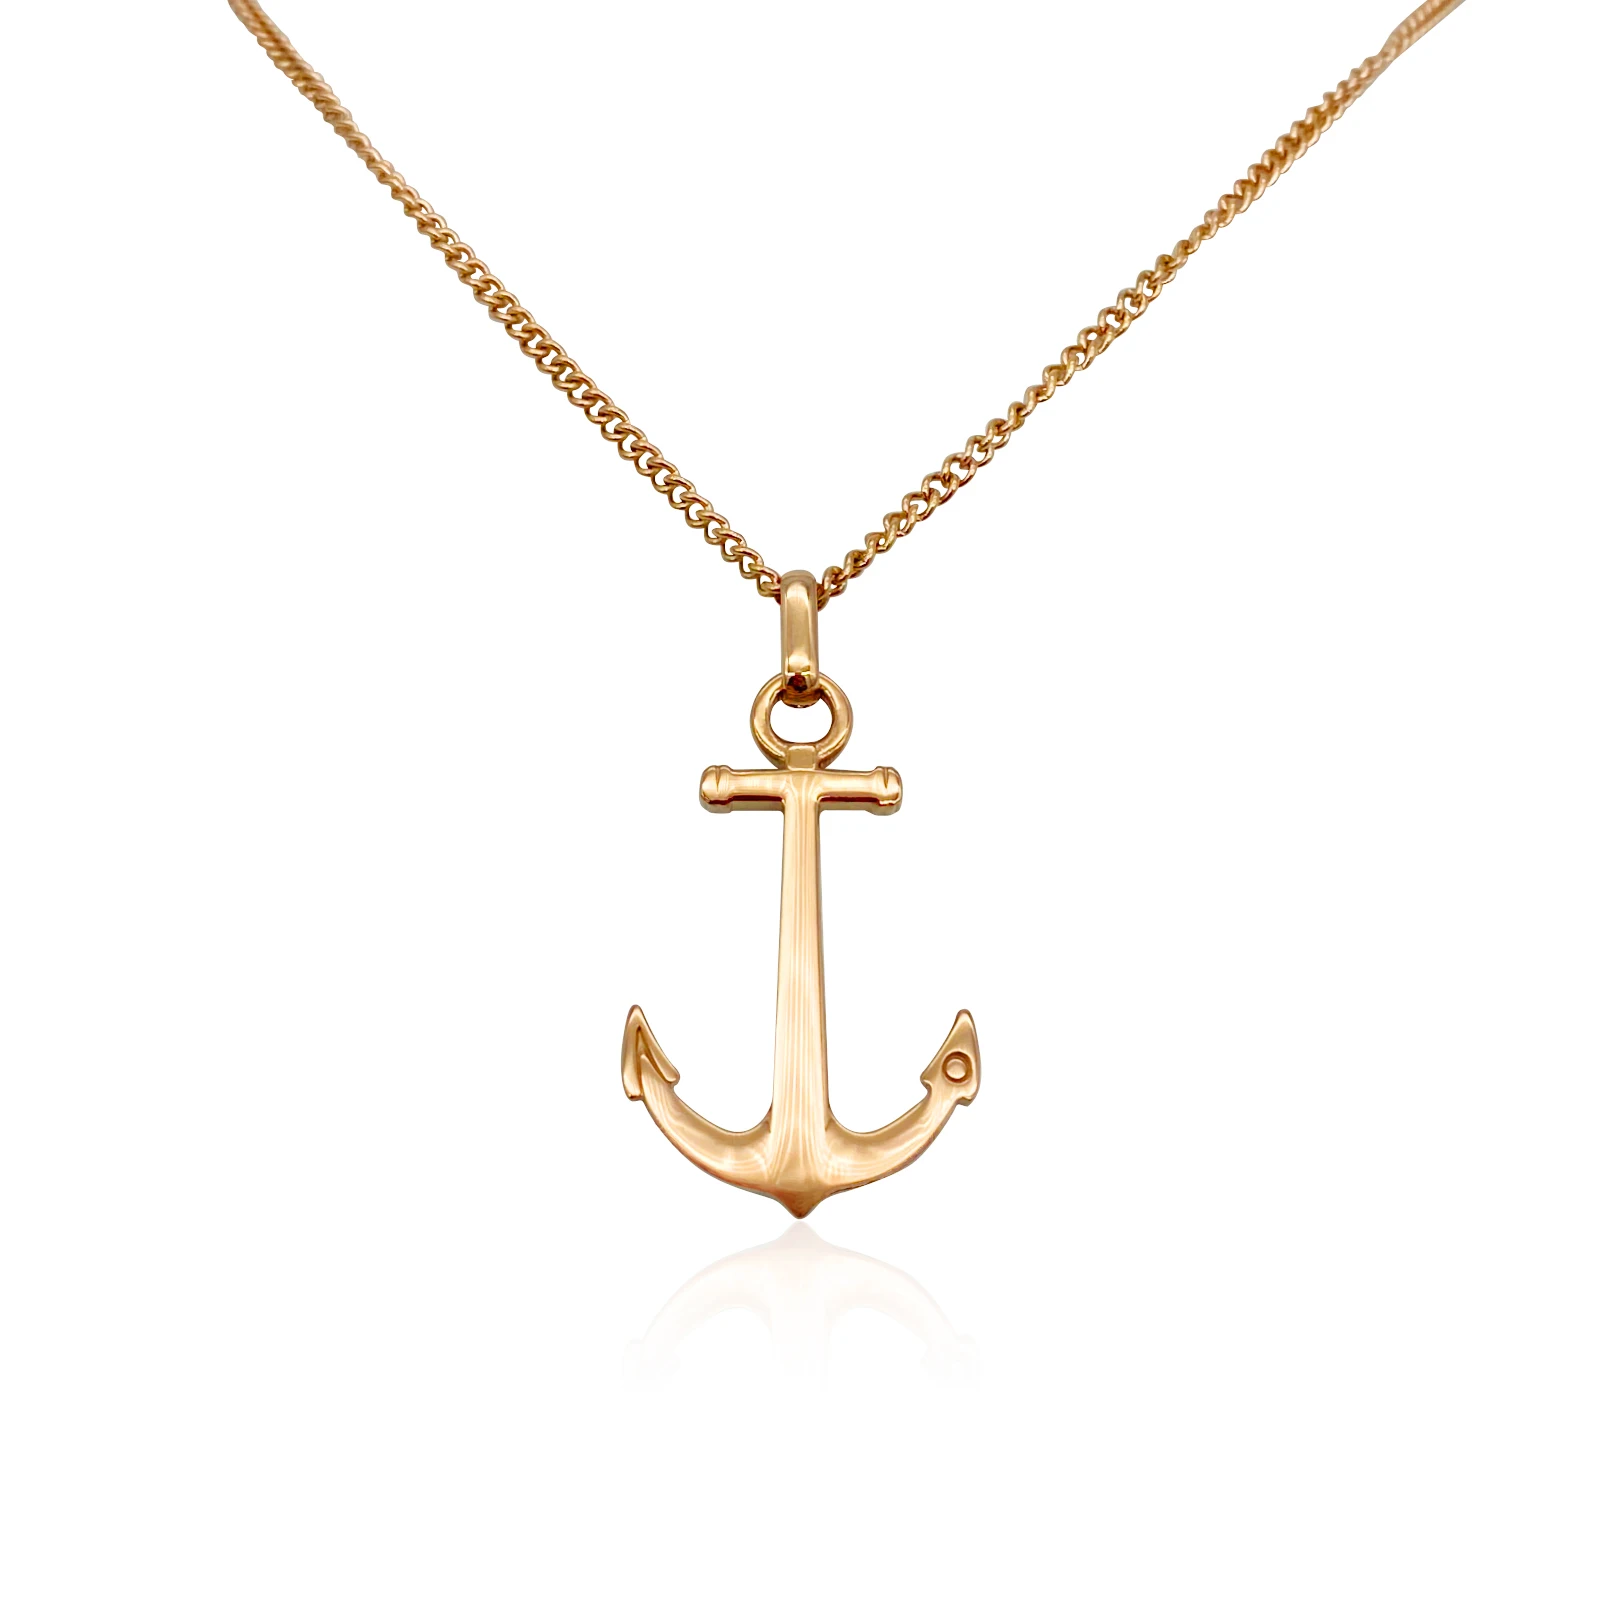 

Runda Men's Necklace Stainless Steel Gold 24K Plating with Anchor Adjustable Size 65cm Long Fashion Gold Pendent Necklace